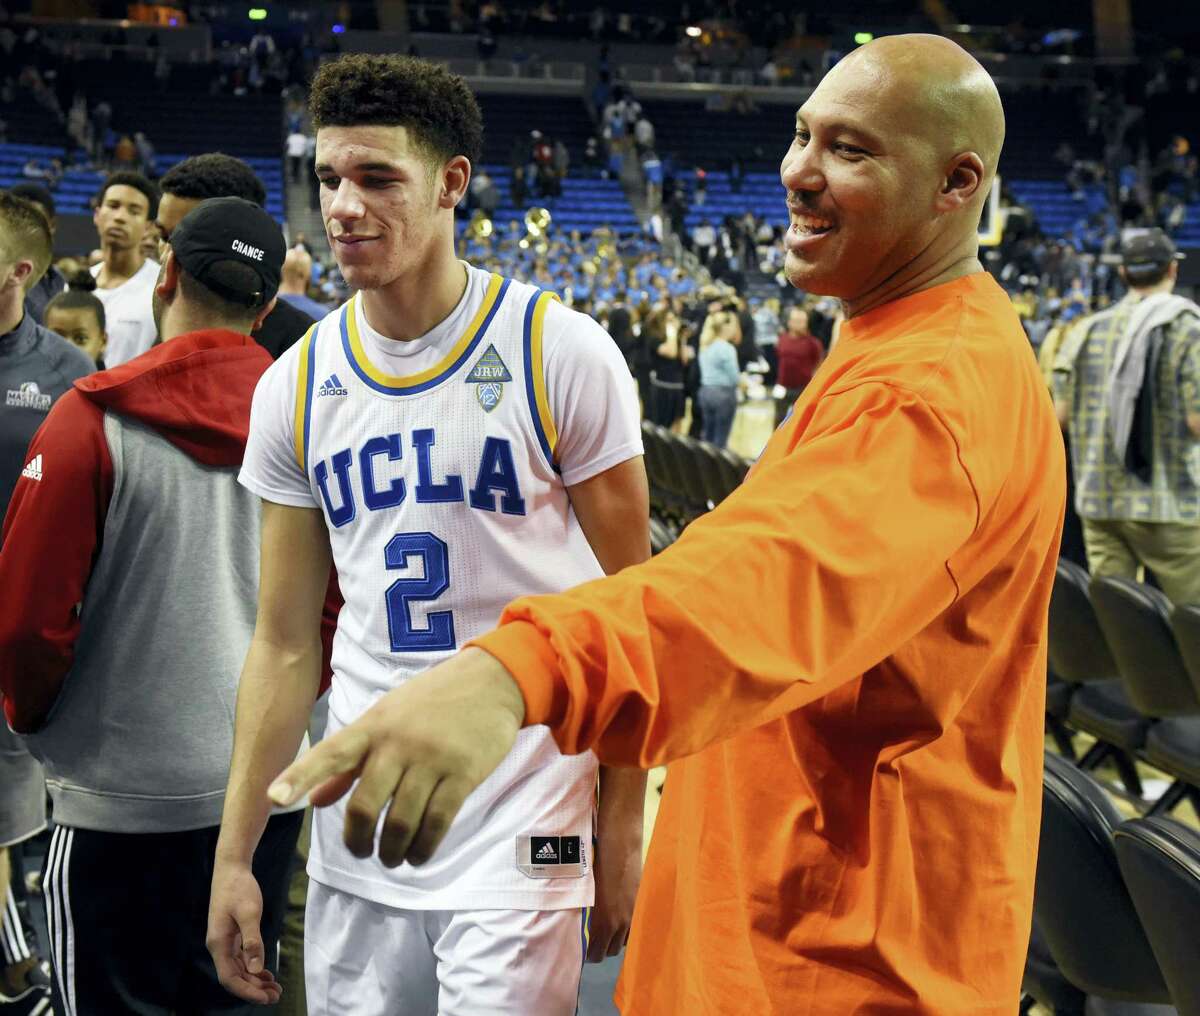 In this Nov. 20, 2016 photo, UCLA’s Lonzo Ball (2) walks by his father LaVar Ball, right, to greet family members after UCLA defeated Long Beach State in an NCAA college basketball game in Los Angeles. By now the entire basketball world knows Lonzo Ball is a singular talent with a unique parent.